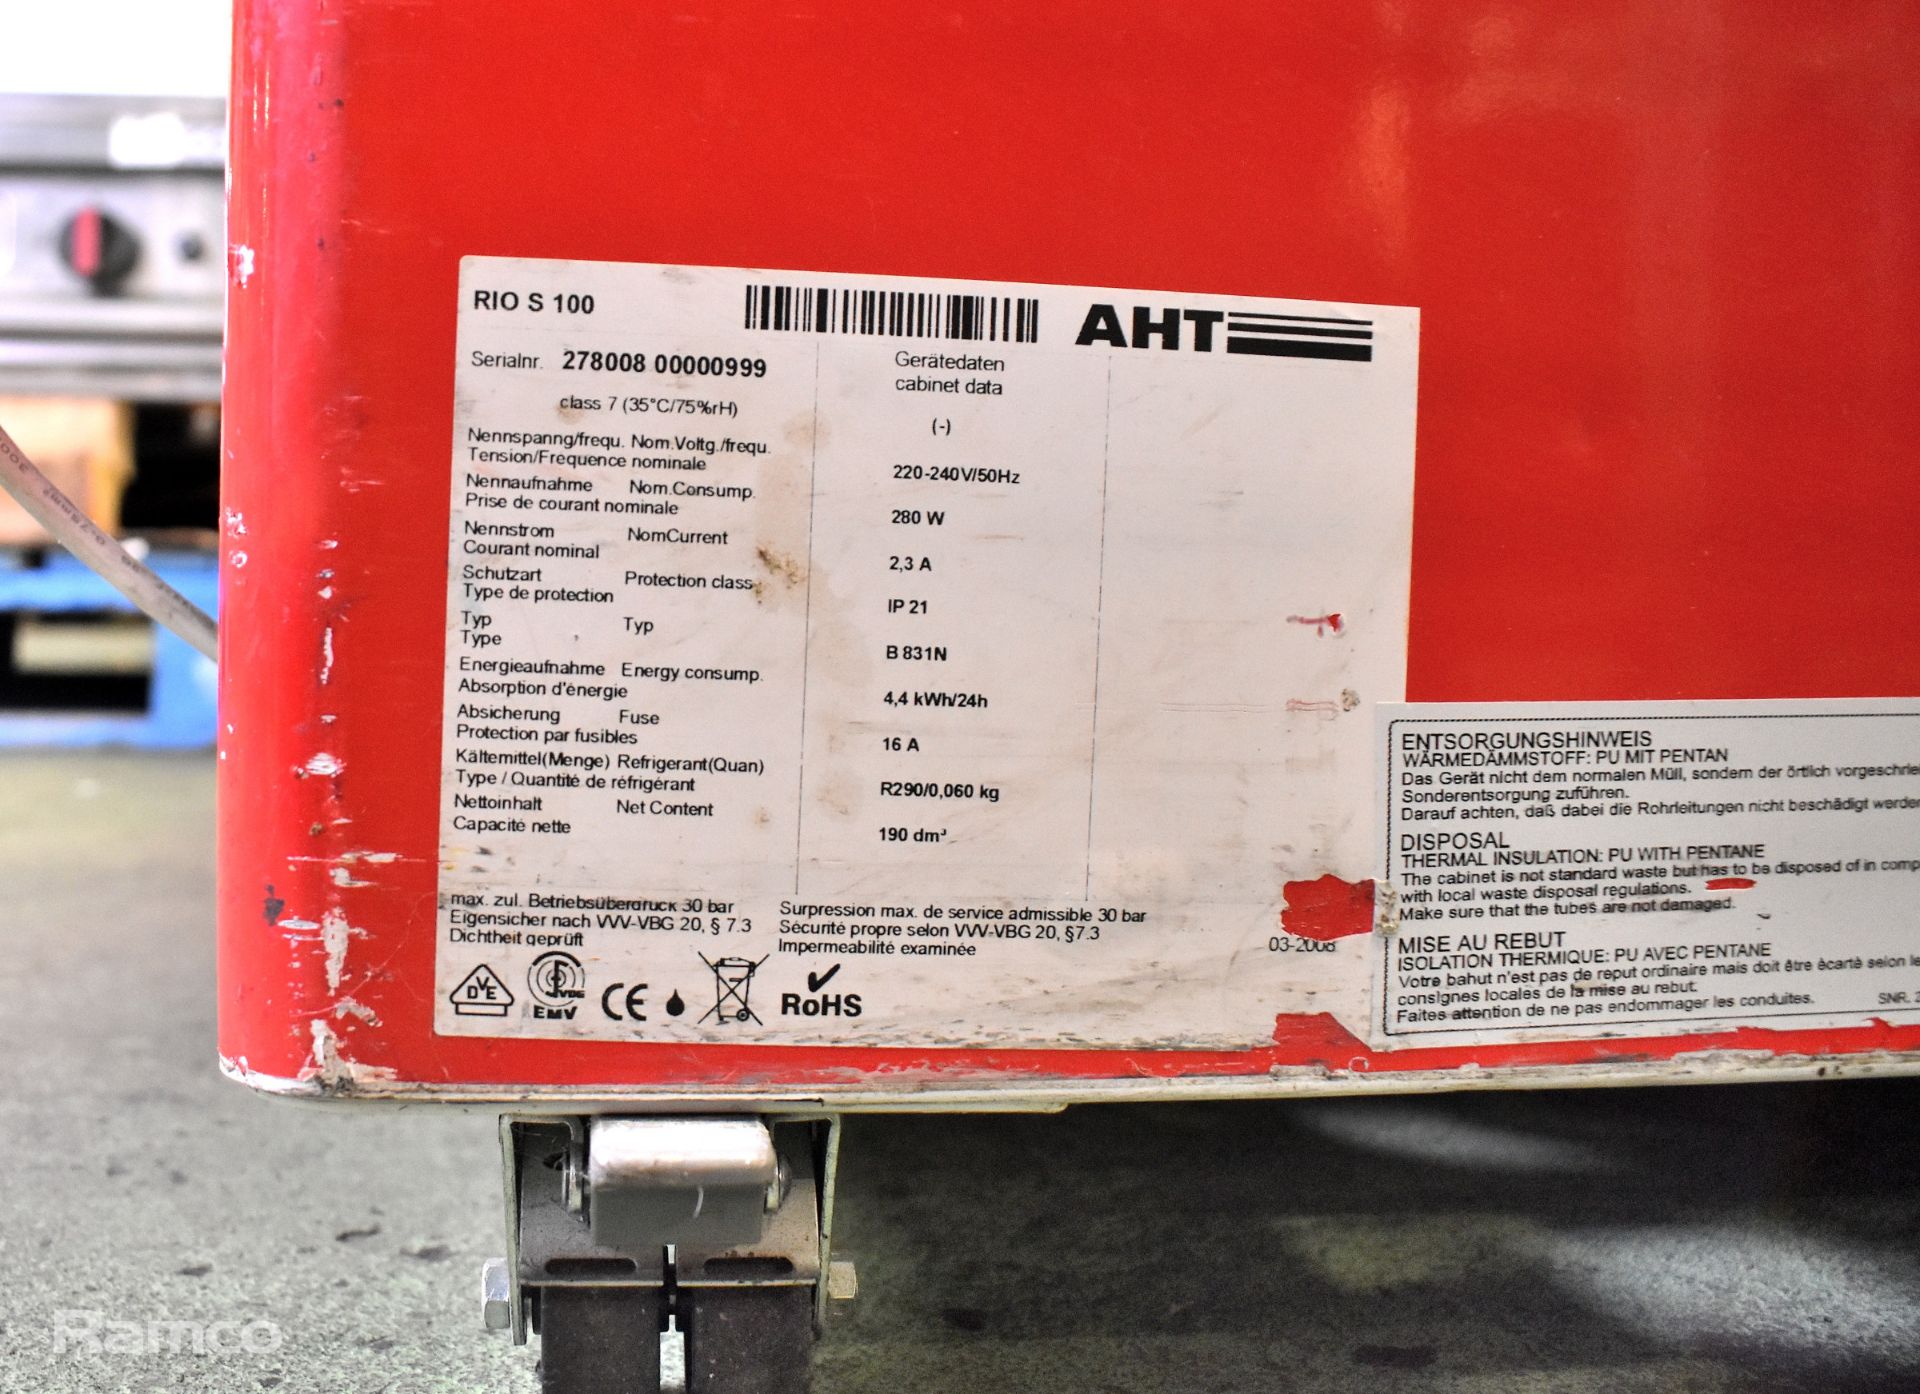 AHT RIO S 100 chest freezer with Wall's branding - Image 6 of 6